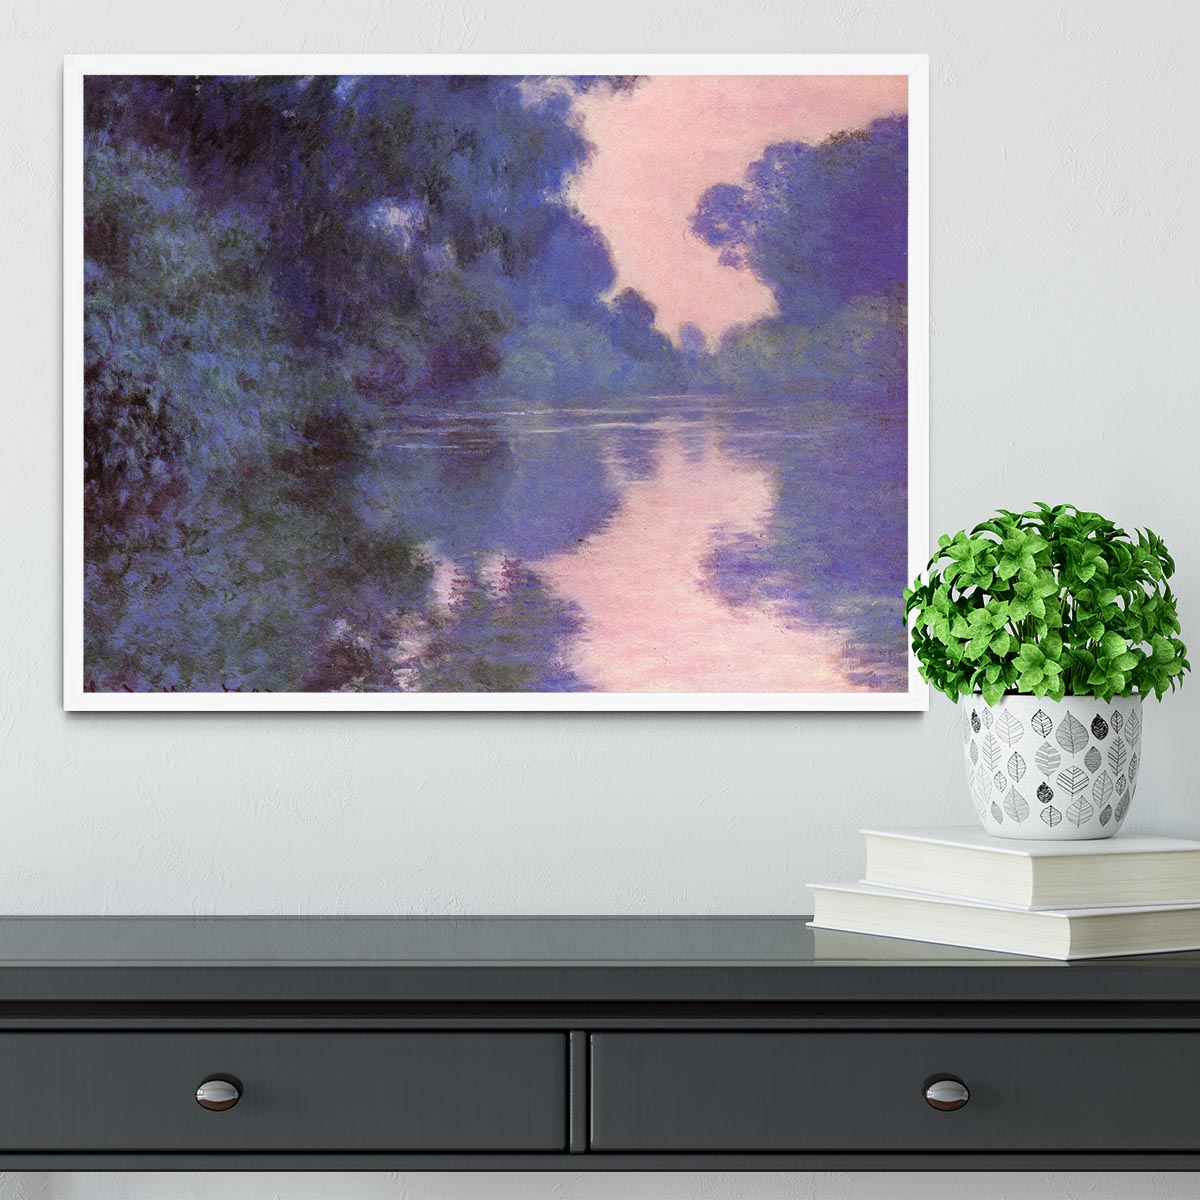 Seine arm at Giverny by Monet Framed Print - Canvas Art Rocks -6